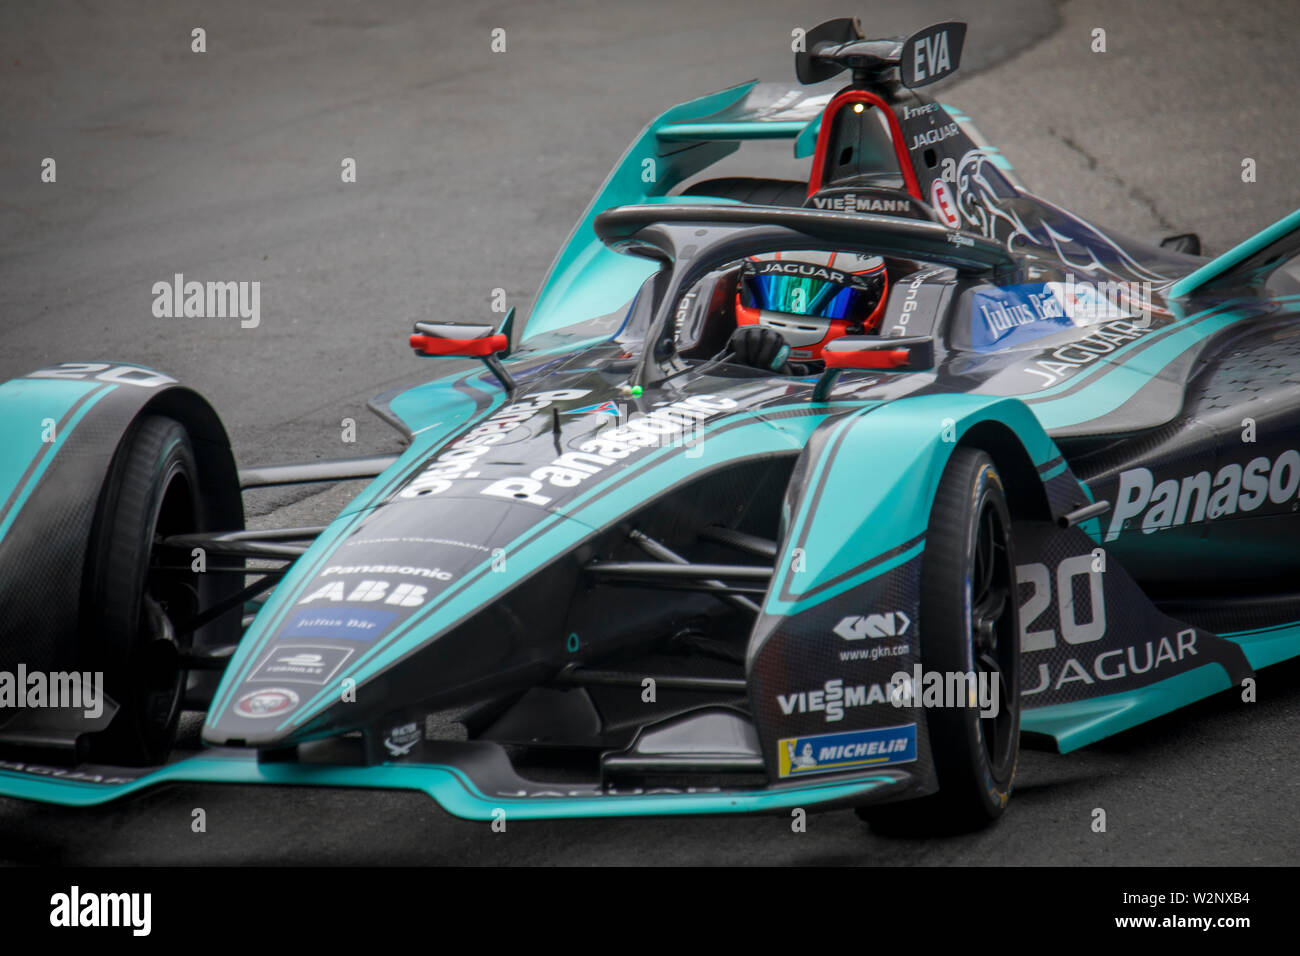 Mitch Evans during Qualifying session ahead of the Julius Bär Formula E race in the swiss capital Bern. Stock Photo